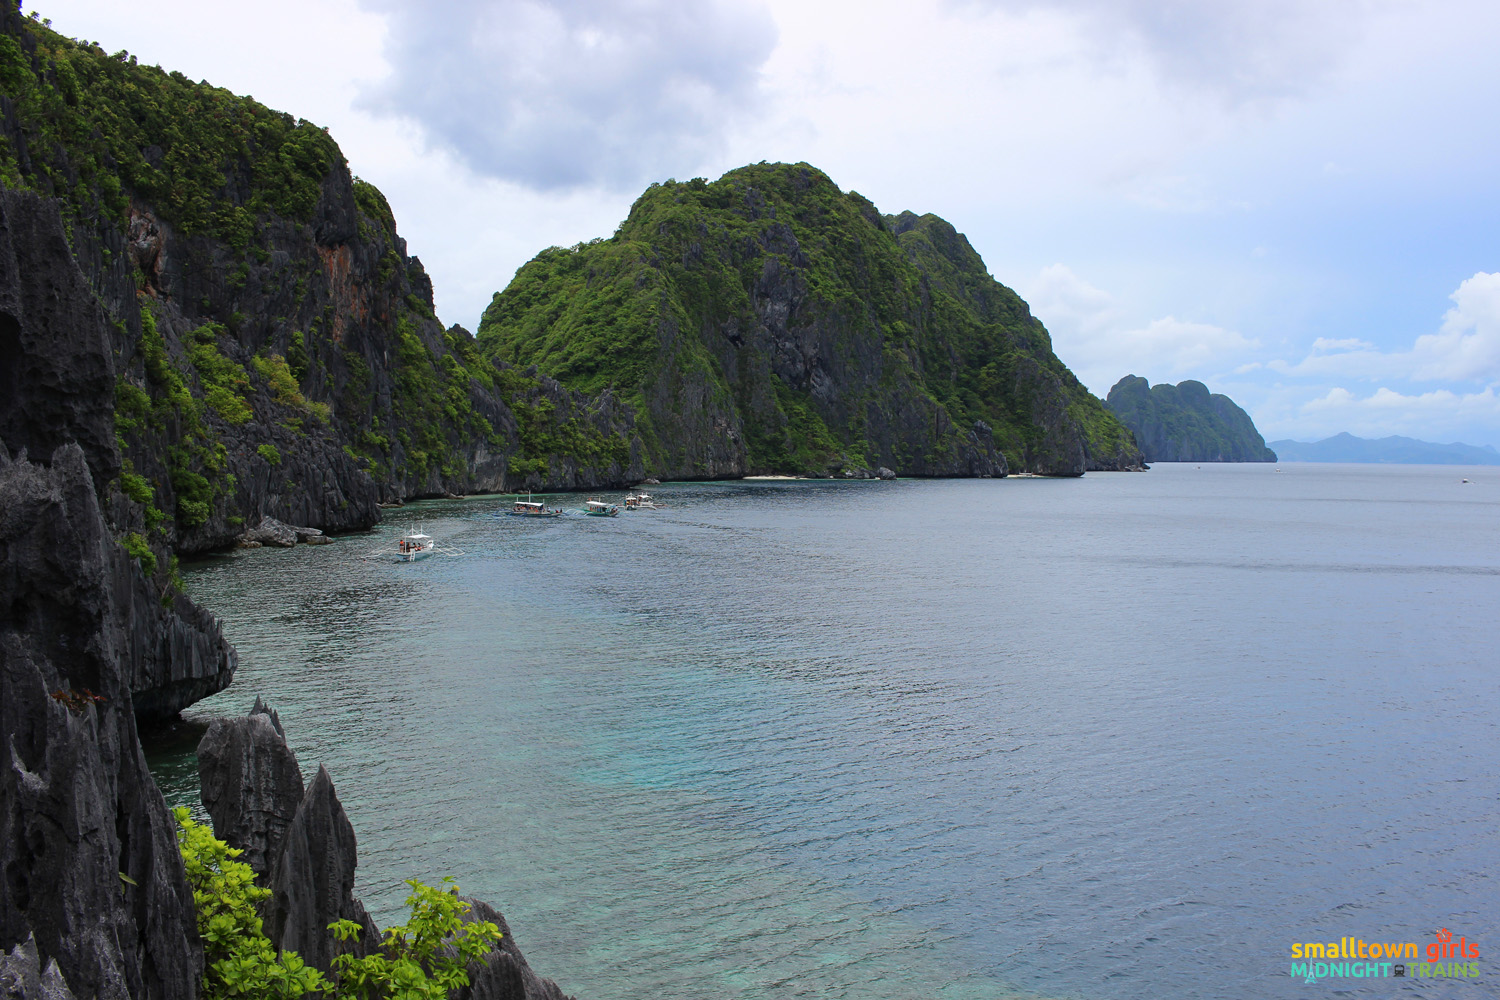 El Nido paradise combo tour A and C -- The view from Matinloc shrine